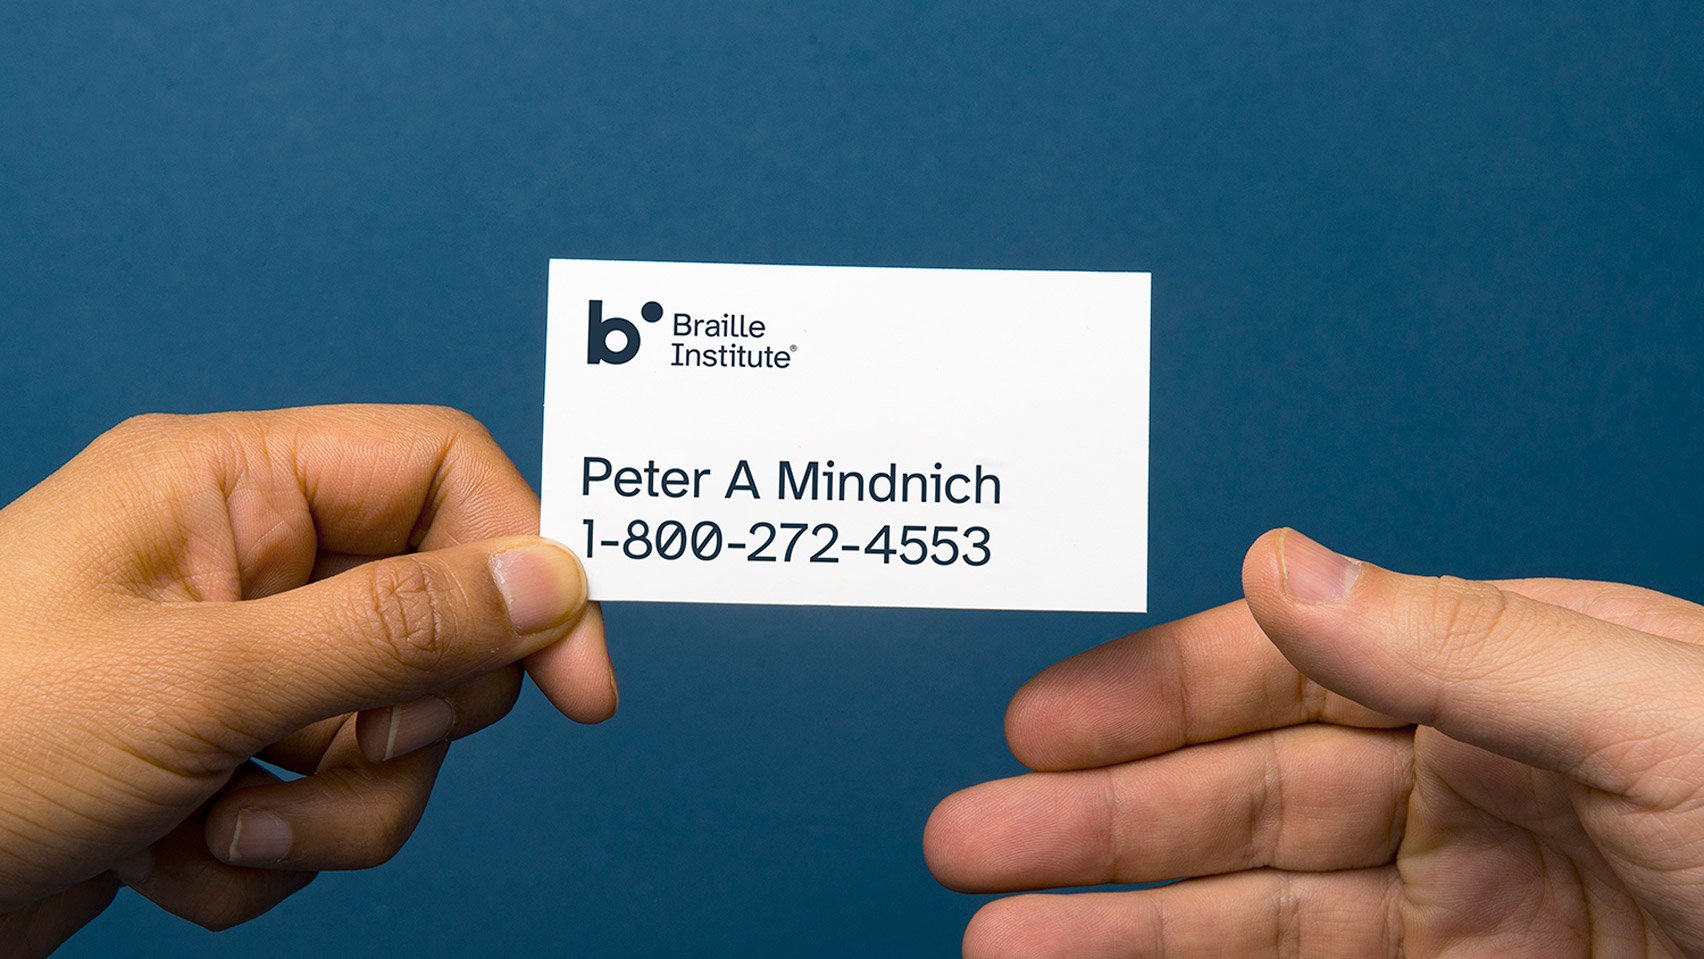 Atkinson Hyperlegible typeface for visually impaired on Braille Institute business card